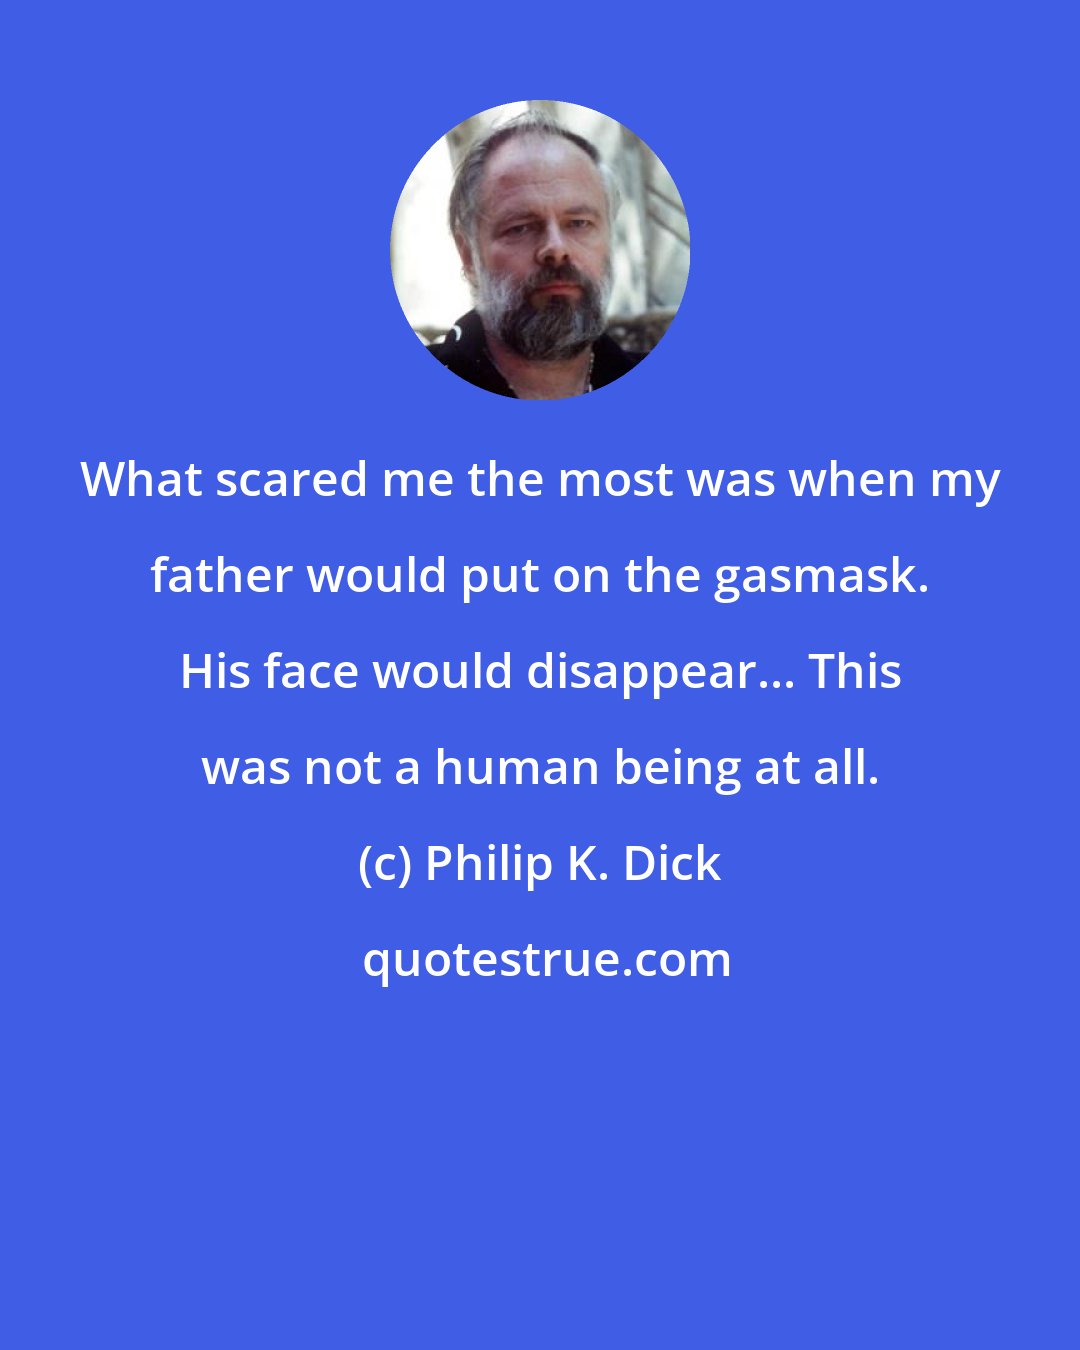 Philip K. Dick: What scared me the most was when my father would put on the gasmask. His face would disappear... This was not a human being at all.